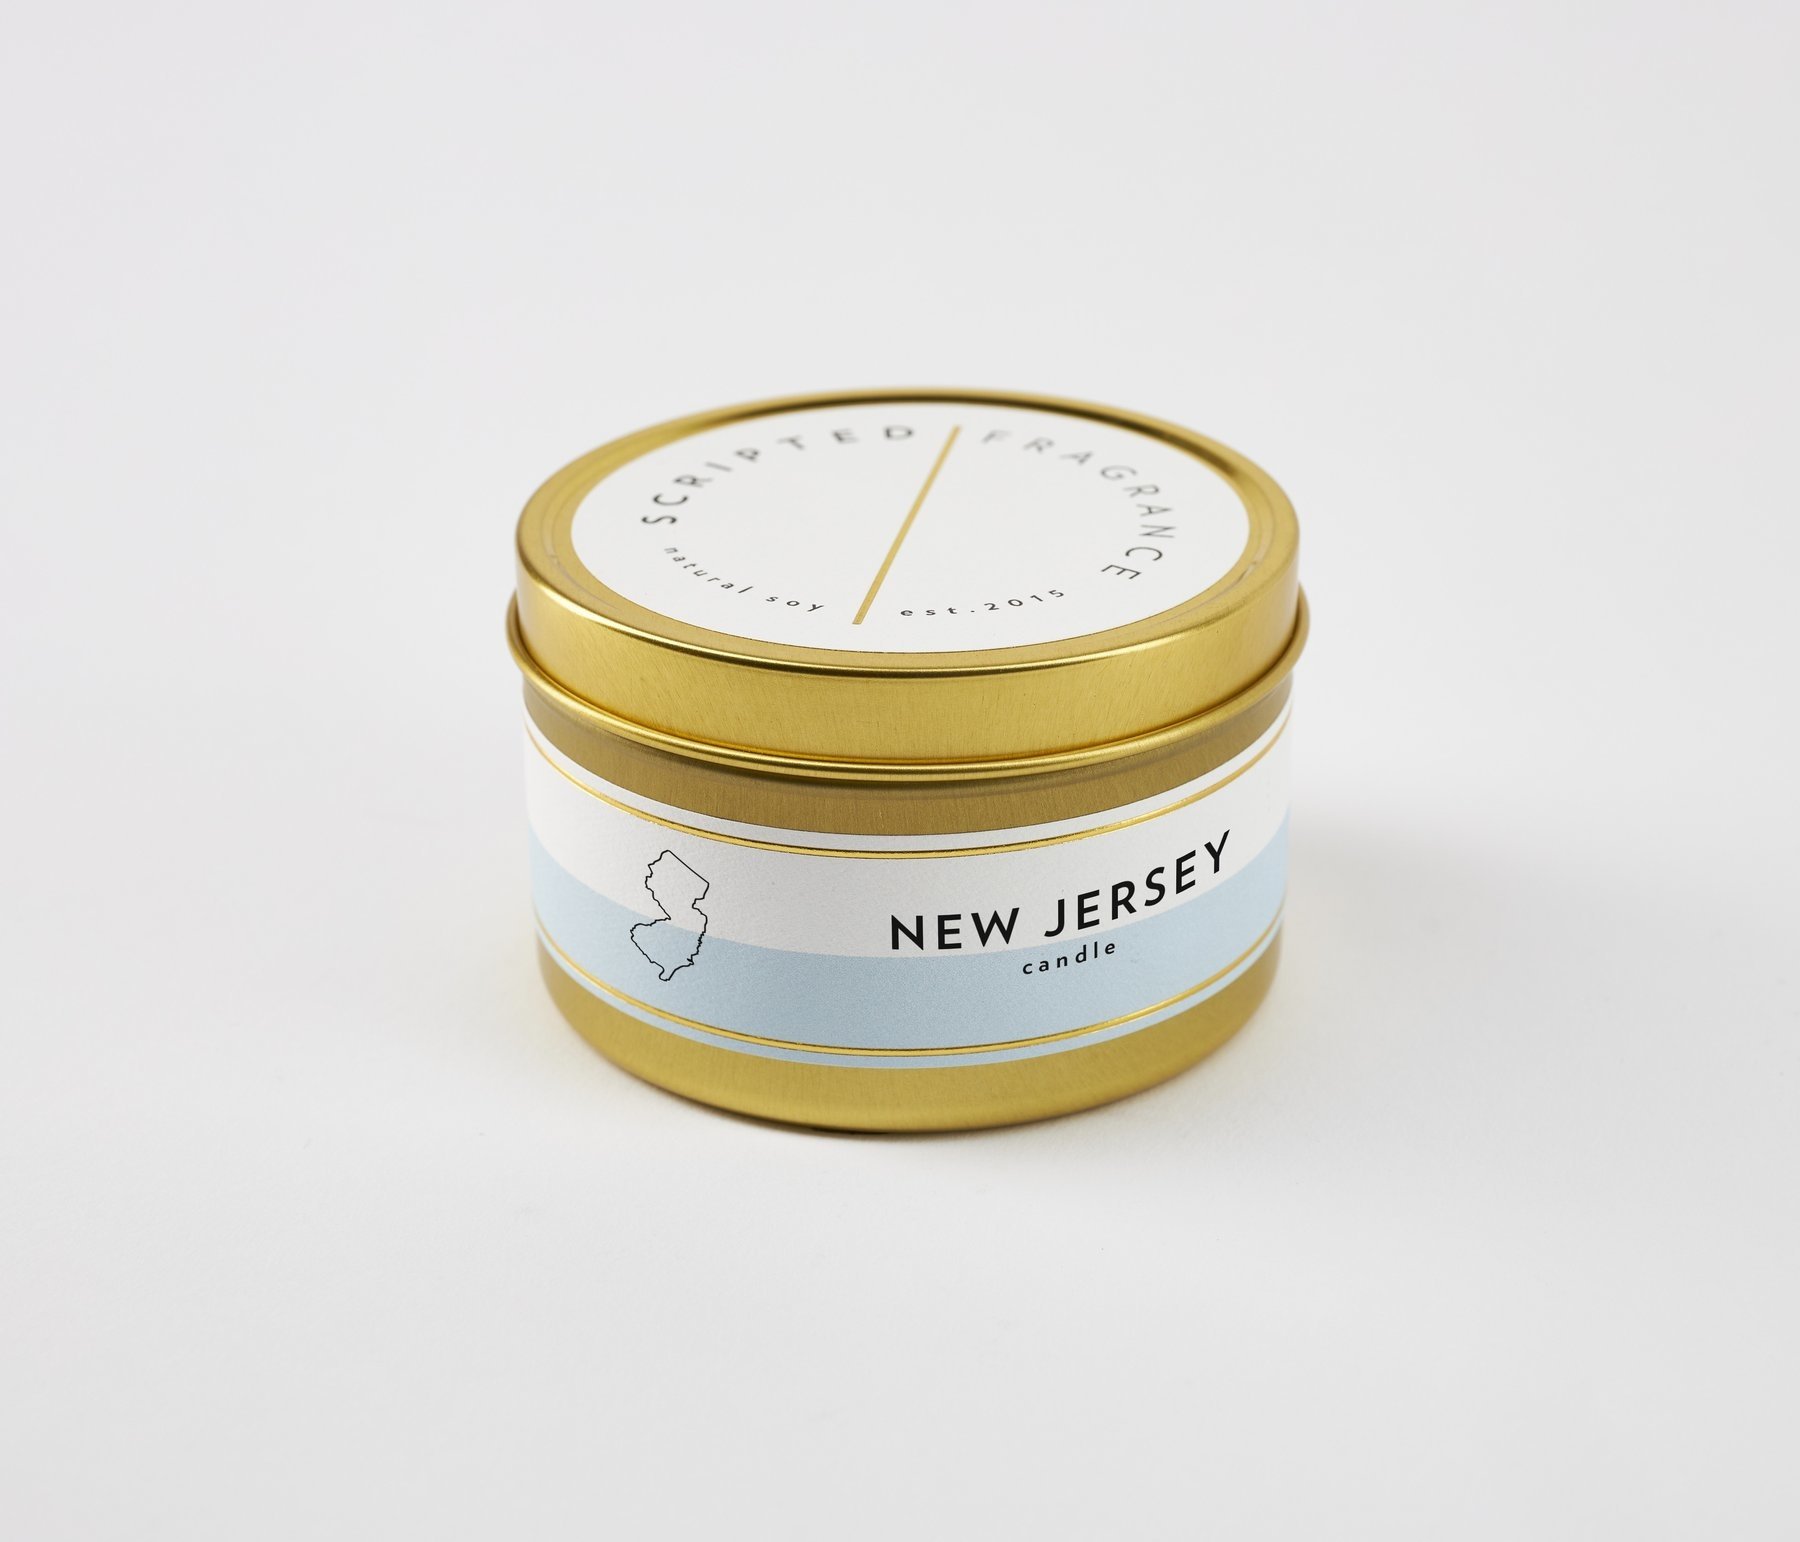 Scripted Fragrance New Jersey Soy Candle - Large Gold Tin